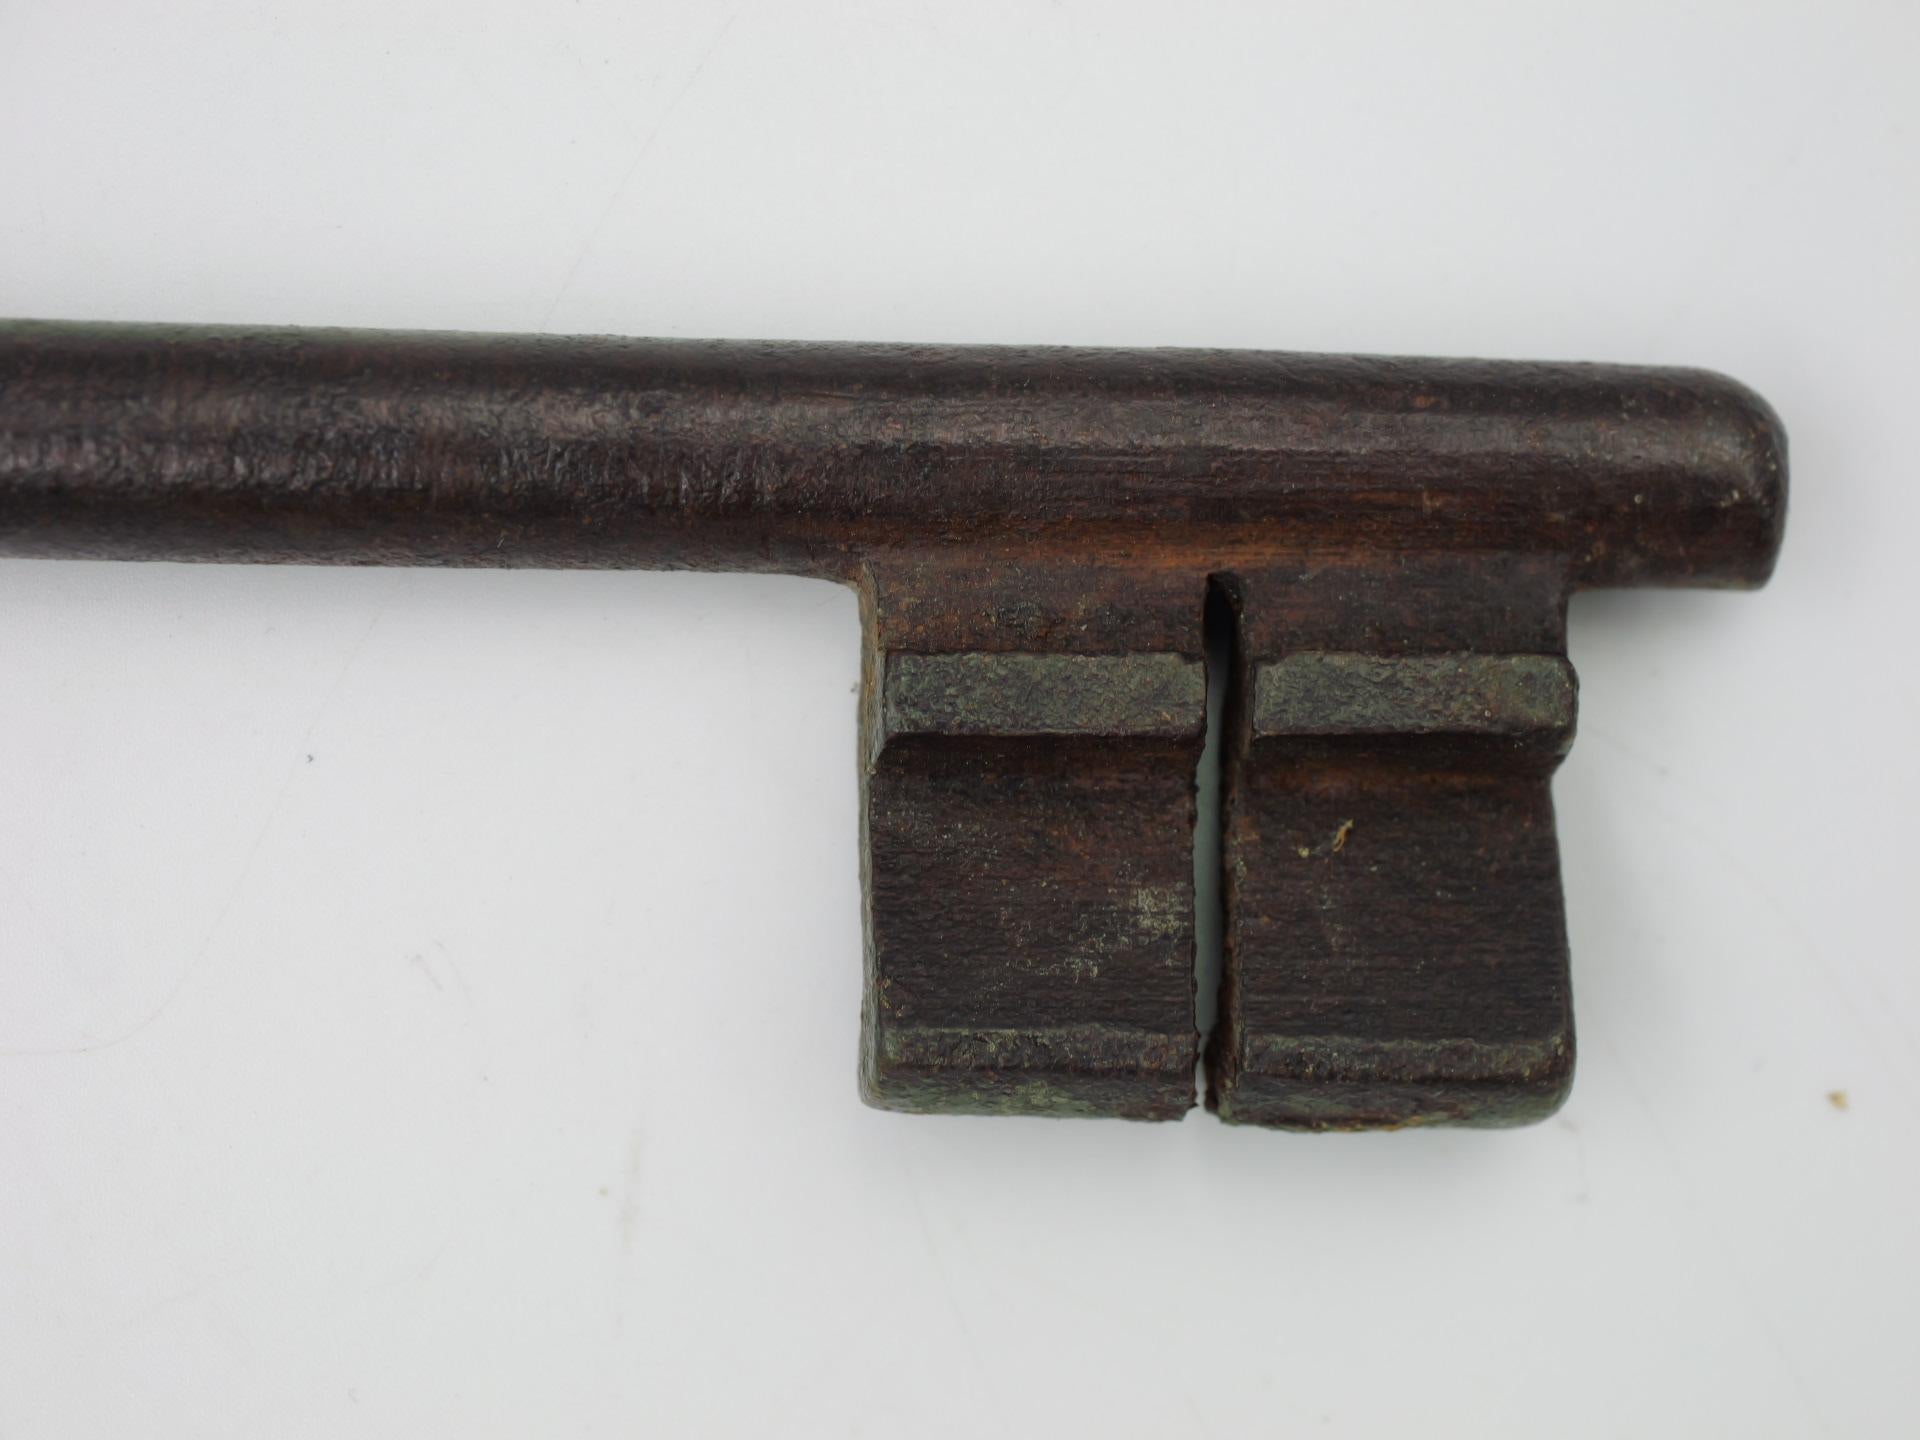 Wrought Iron Big Antique 17th century key  For Sale